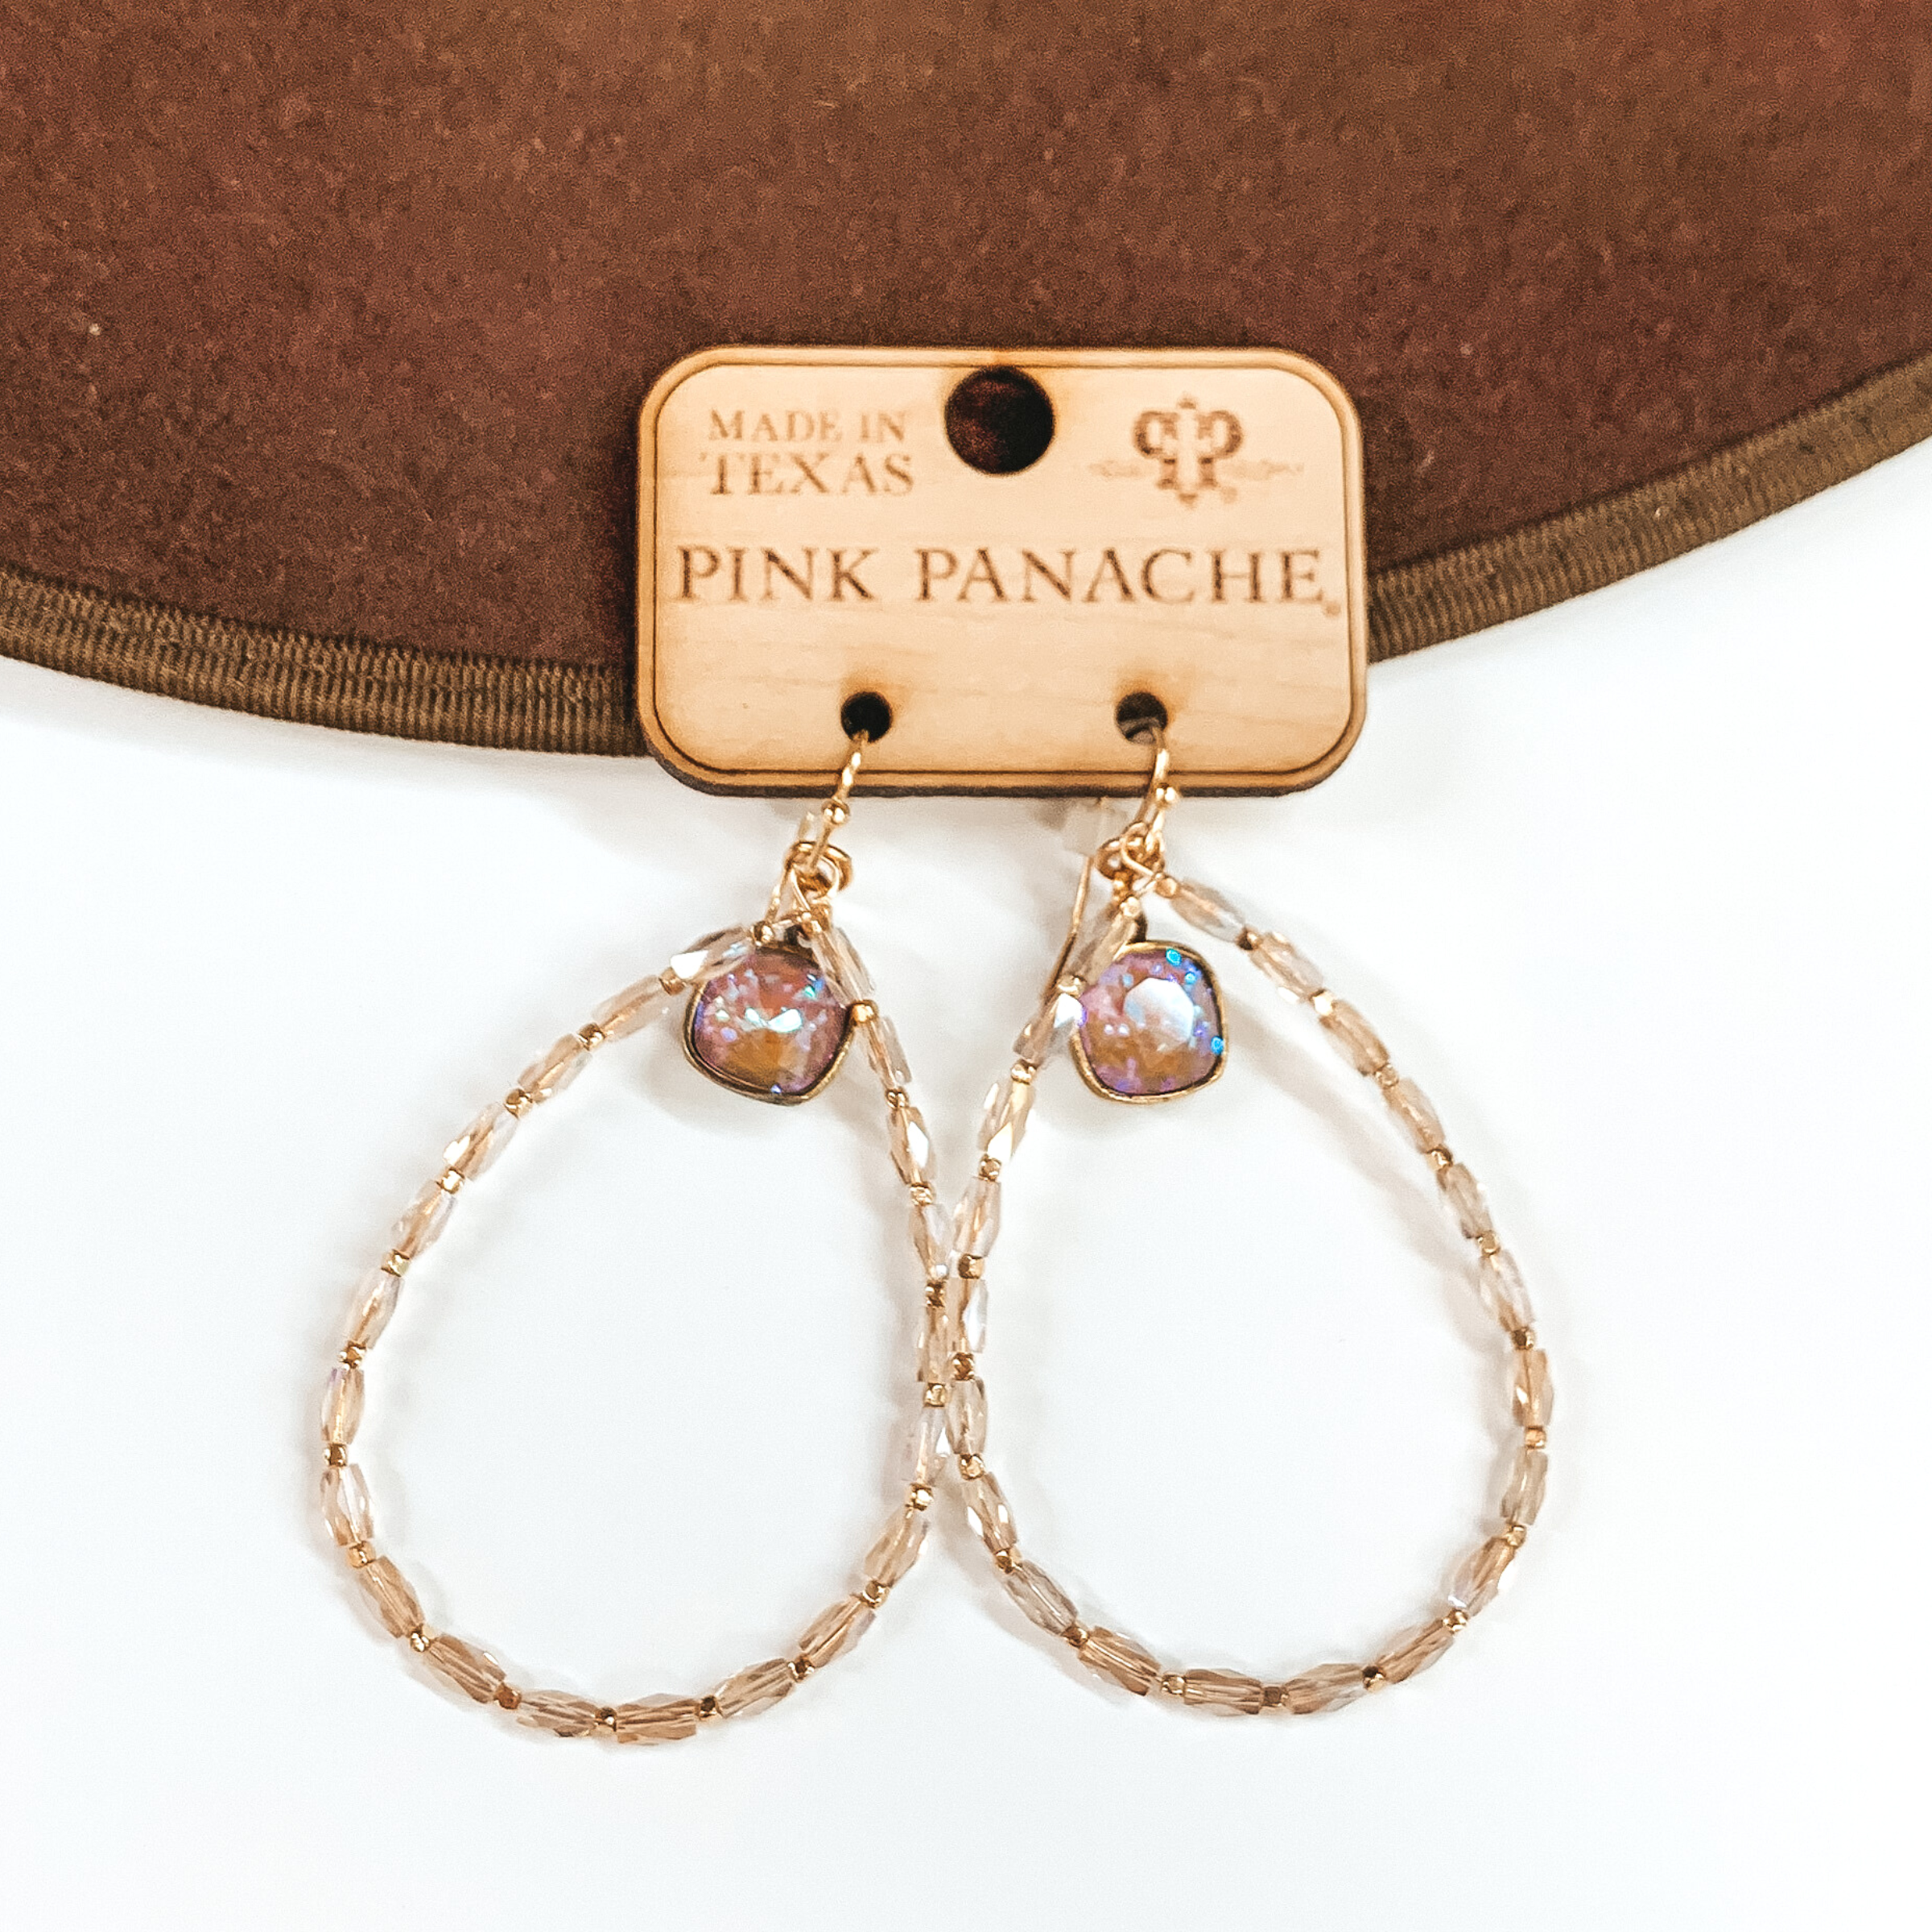 Pictured is a pair of champagne and gold beaded teardrop earrings. These earrings also include cappaccino delight cushion cut drops at the top of the teardrop. These earrings are pictured laying partially on a brown hat brim on a white background.